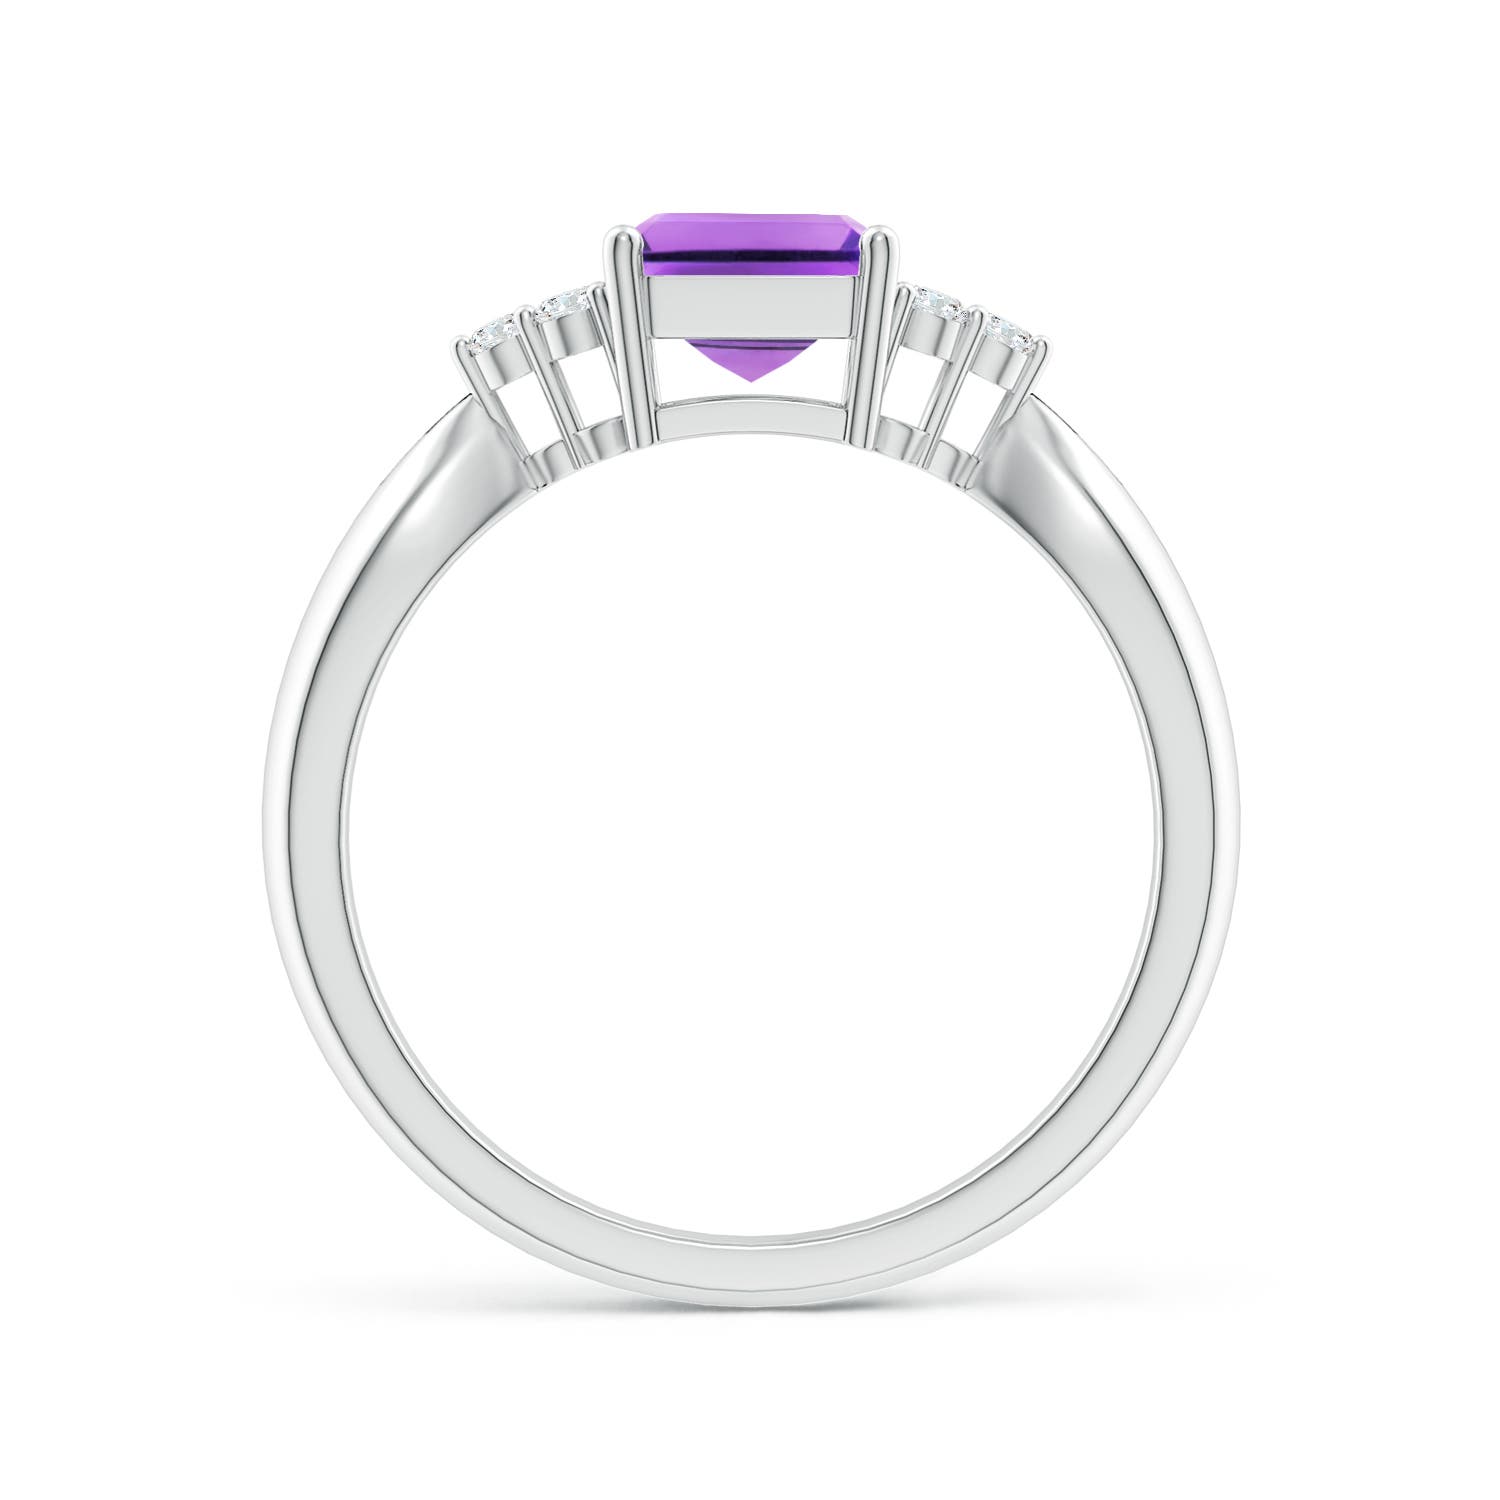 AA - Amethyst / 1.67 CT / 14 KT White Gold